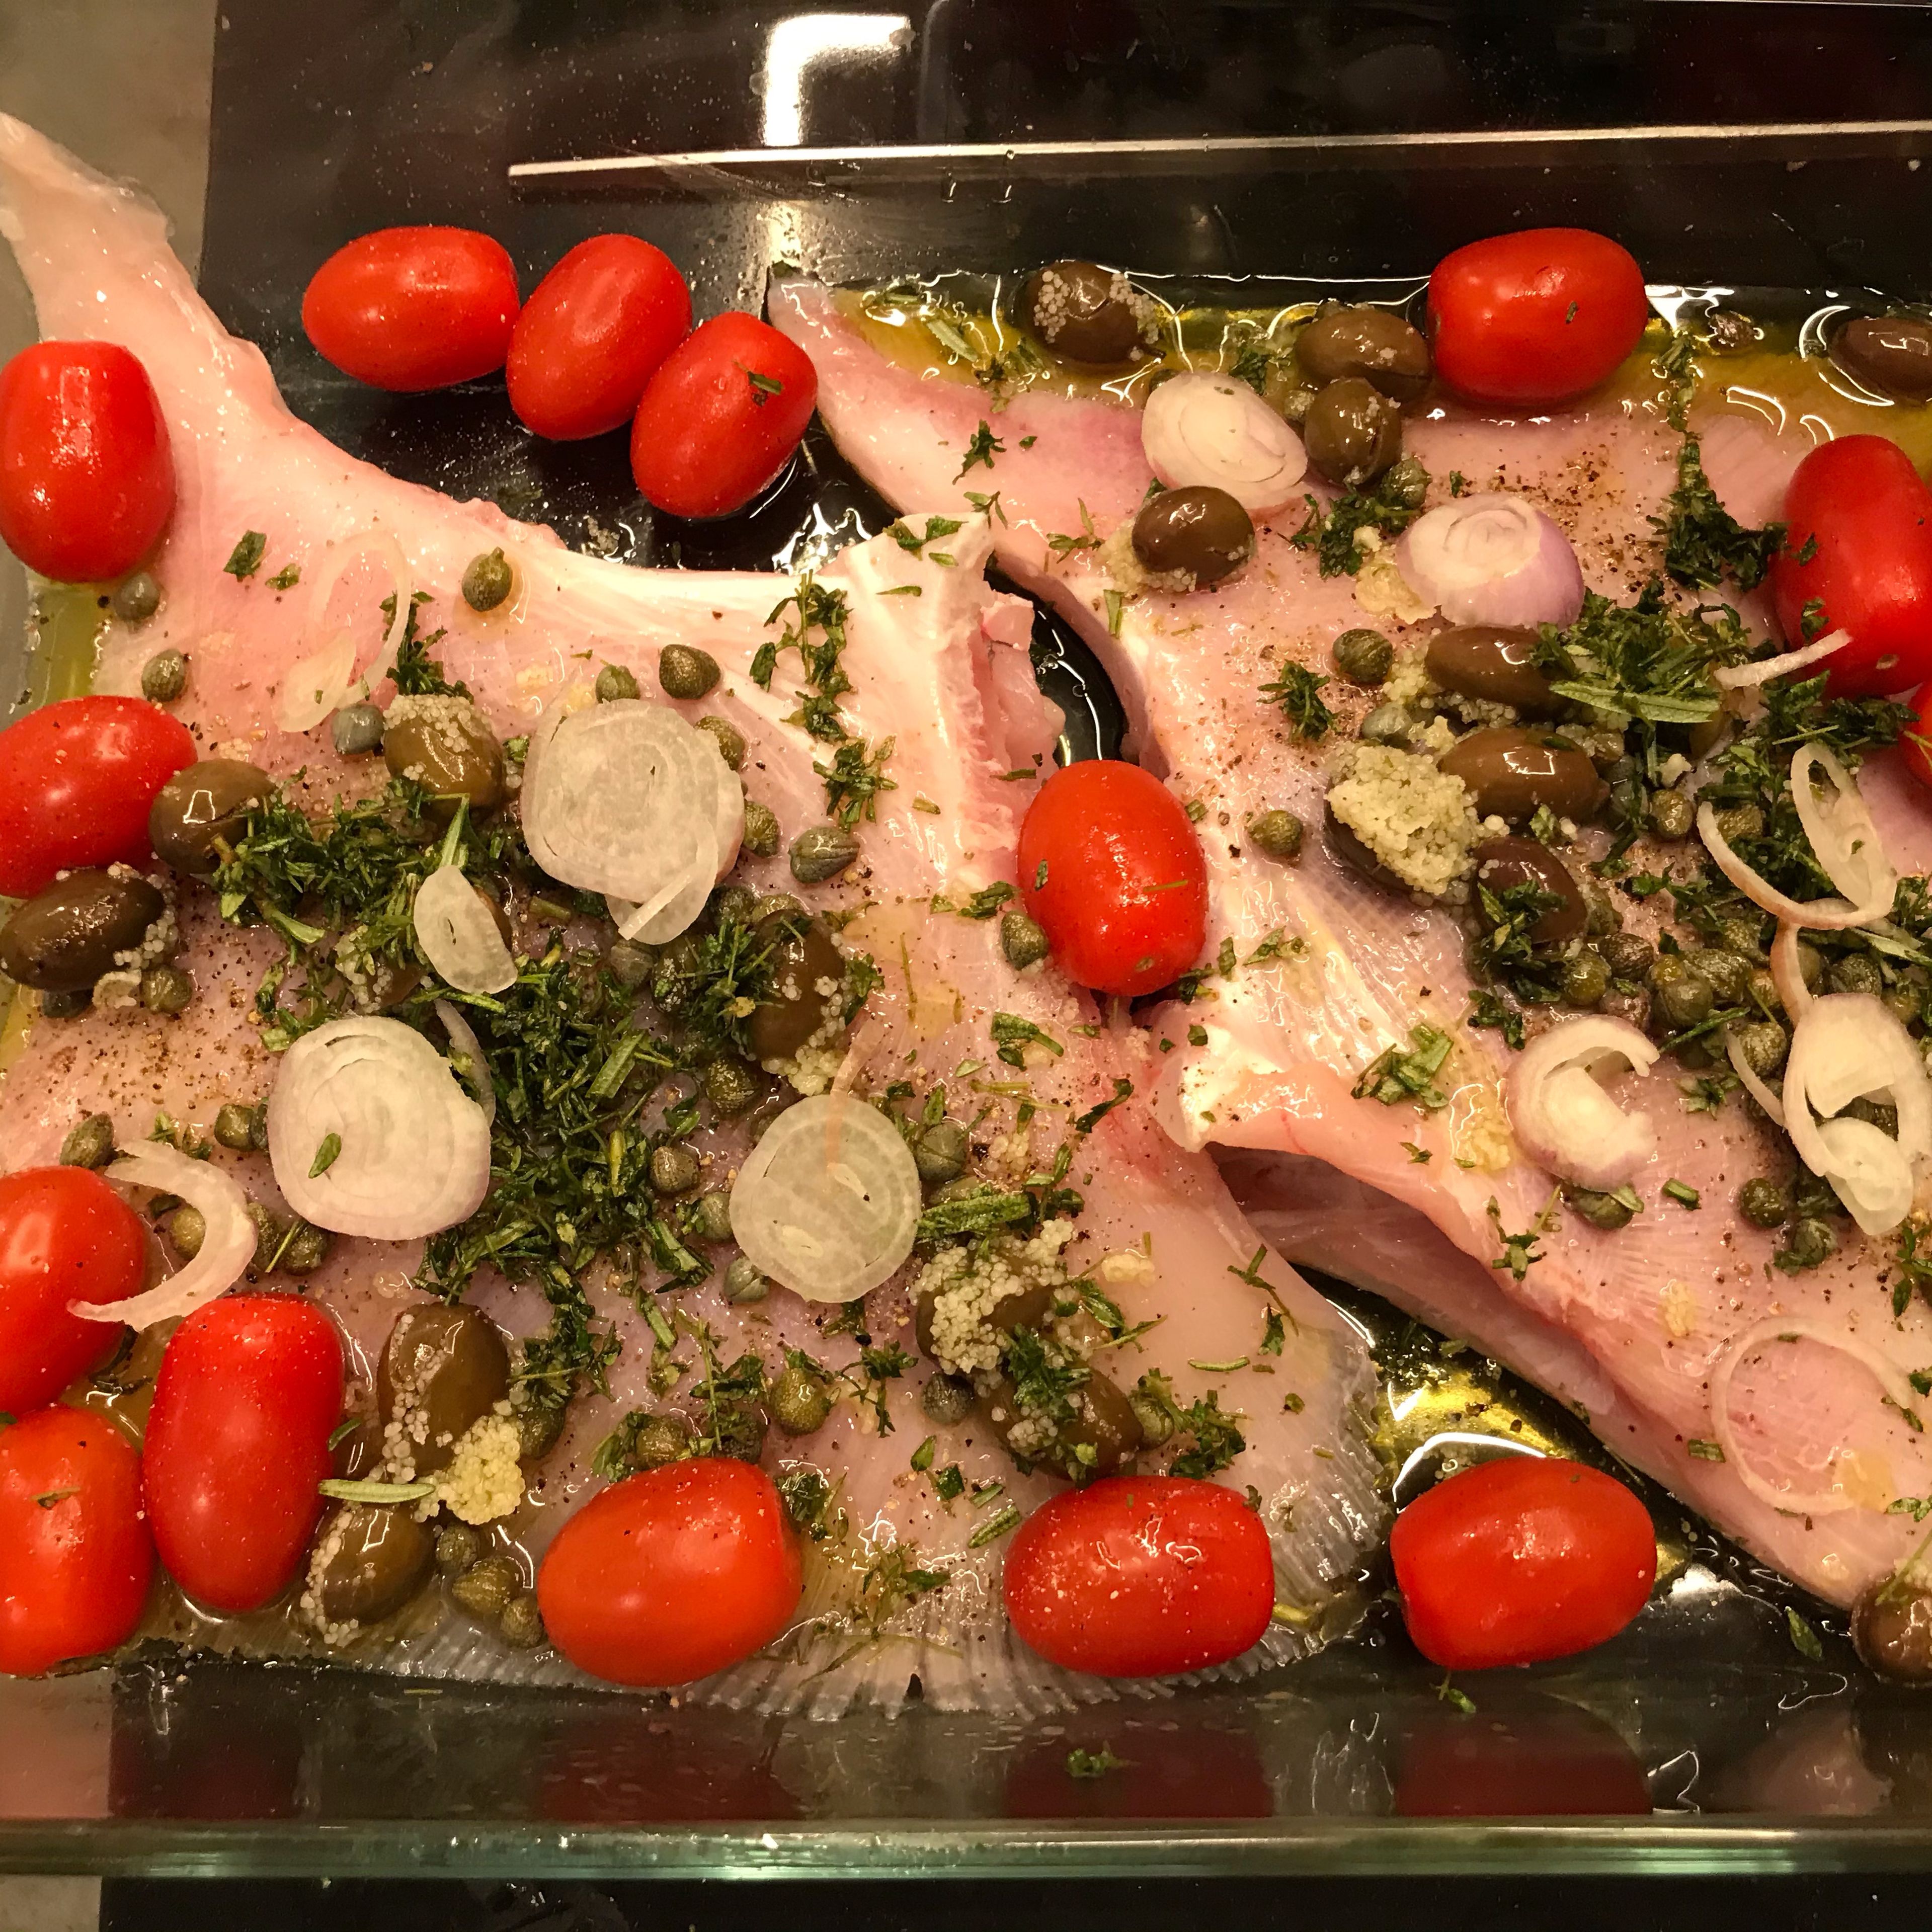 Add the sliced shallot, the crushed garlic, rosemary, thym, tomatoes, olives and capers on top of the skates. Place on the oven for 15-20min.